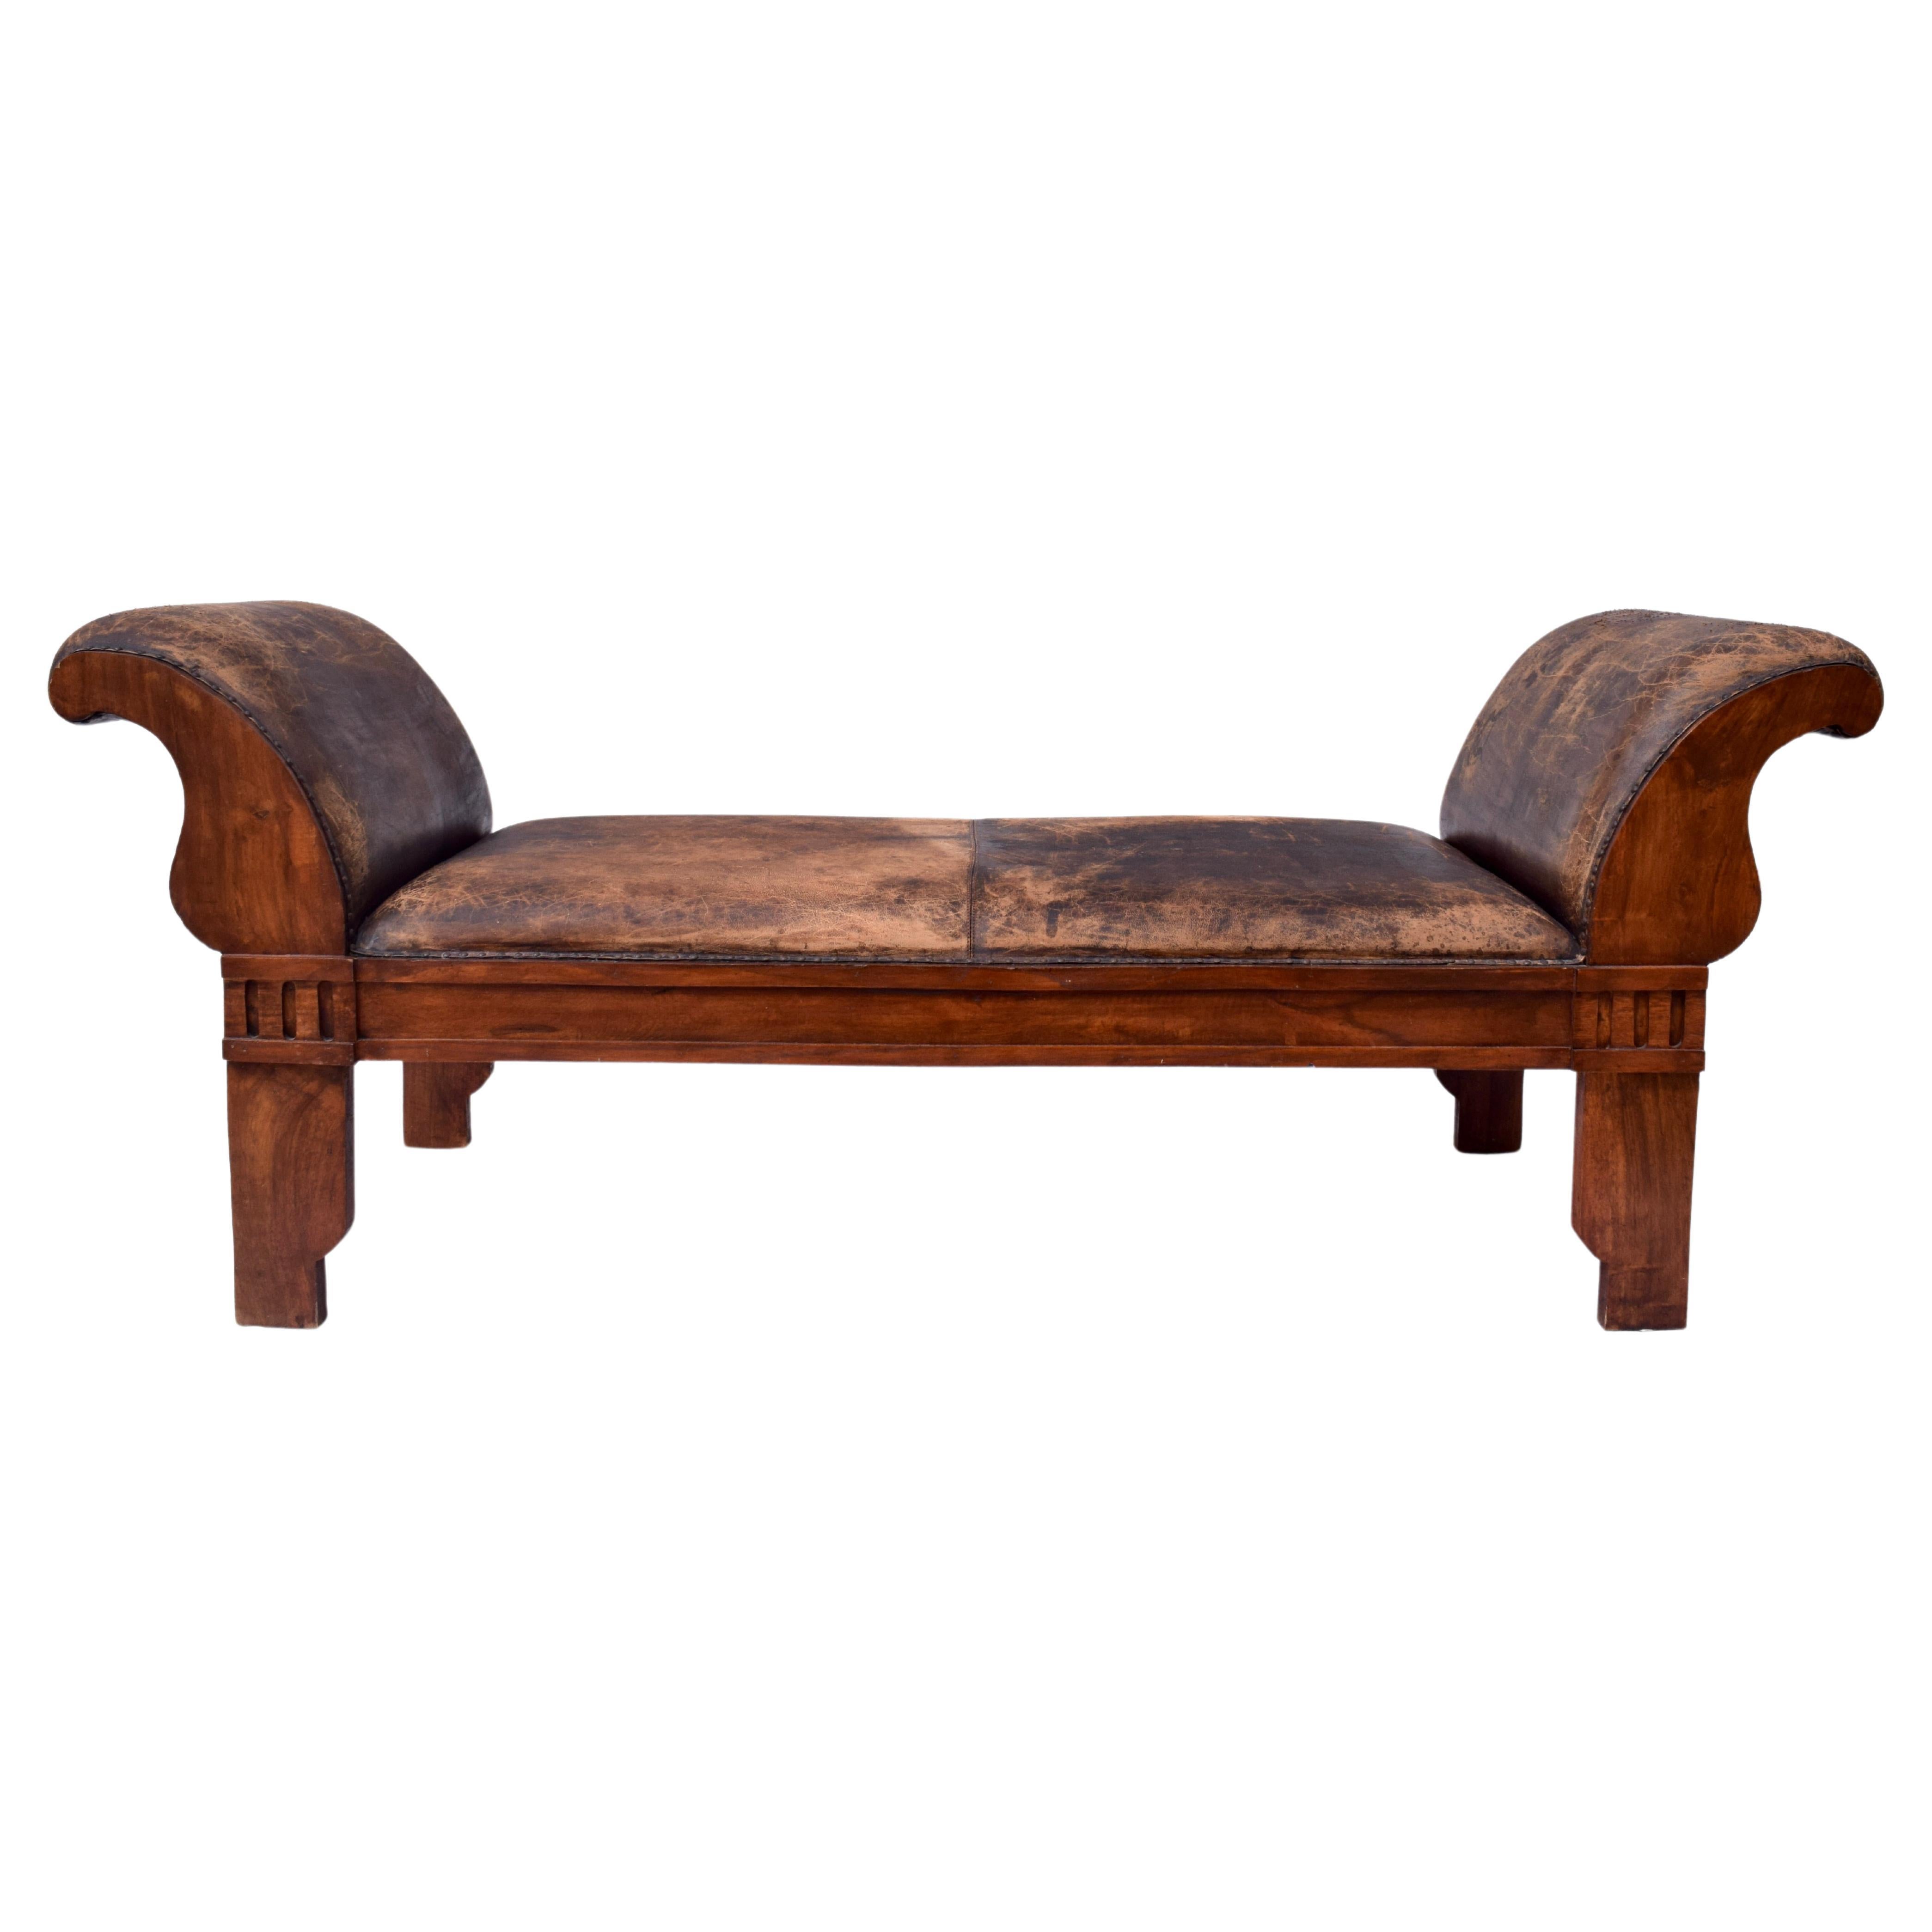 Distressed Leather Rolled Arm carved Oak Bench